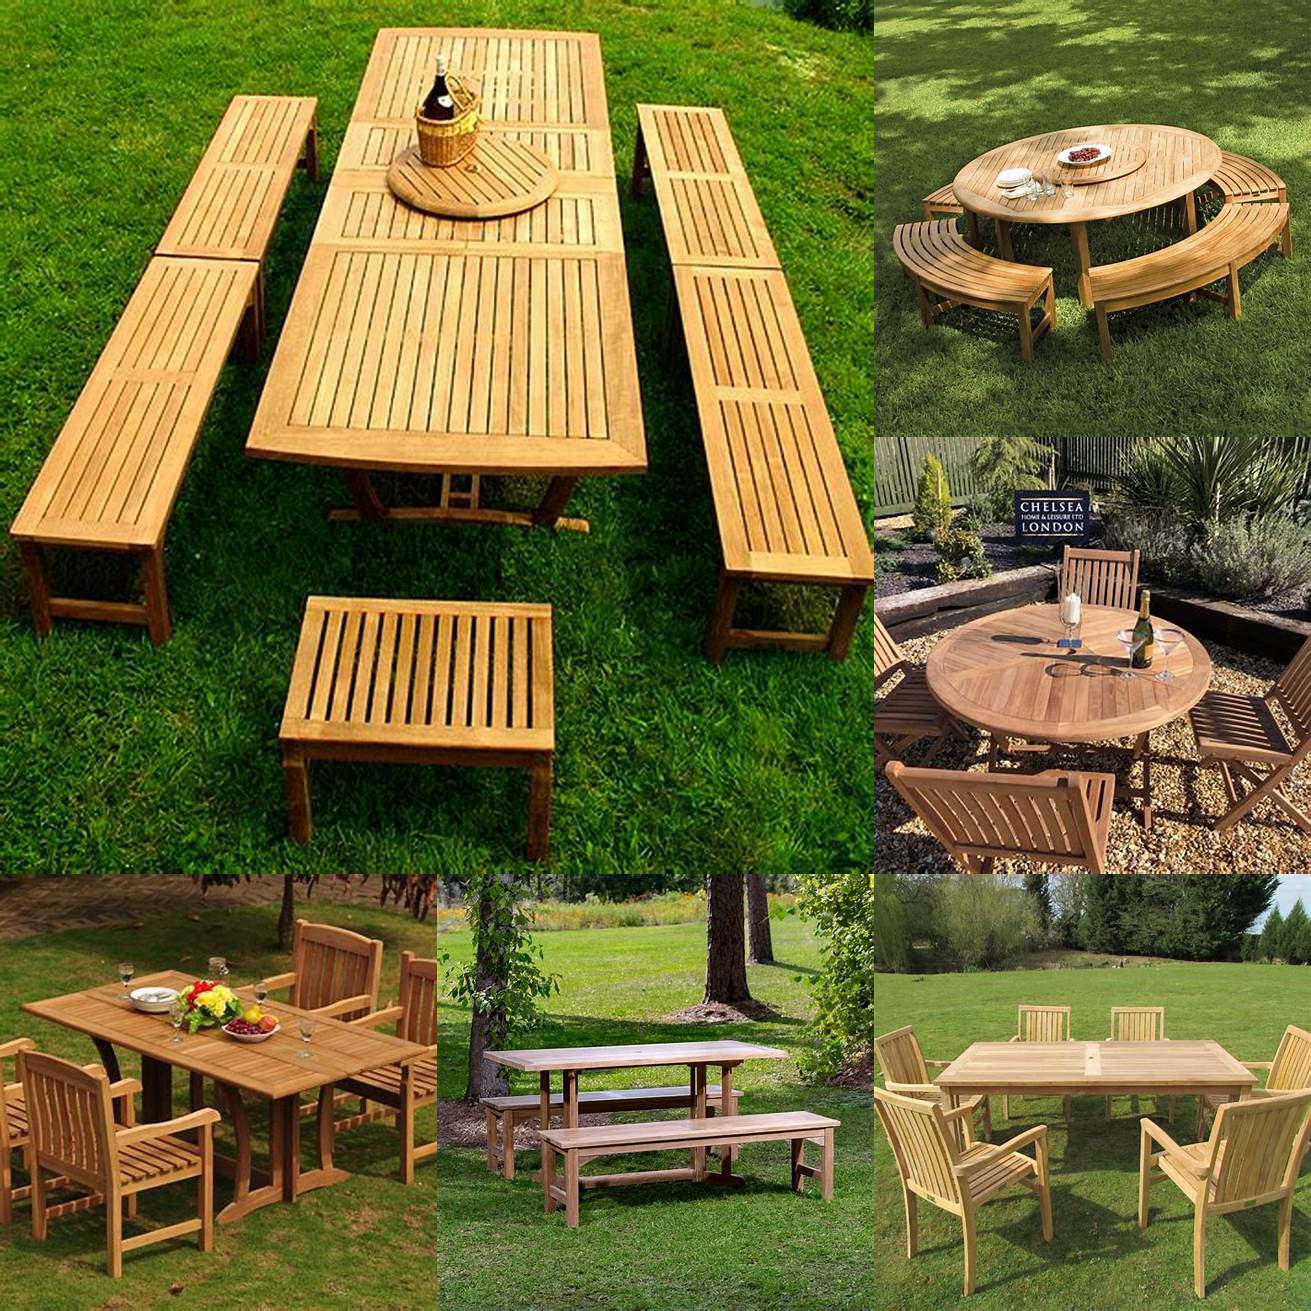 Teak Picnic Table with Outdoor Games